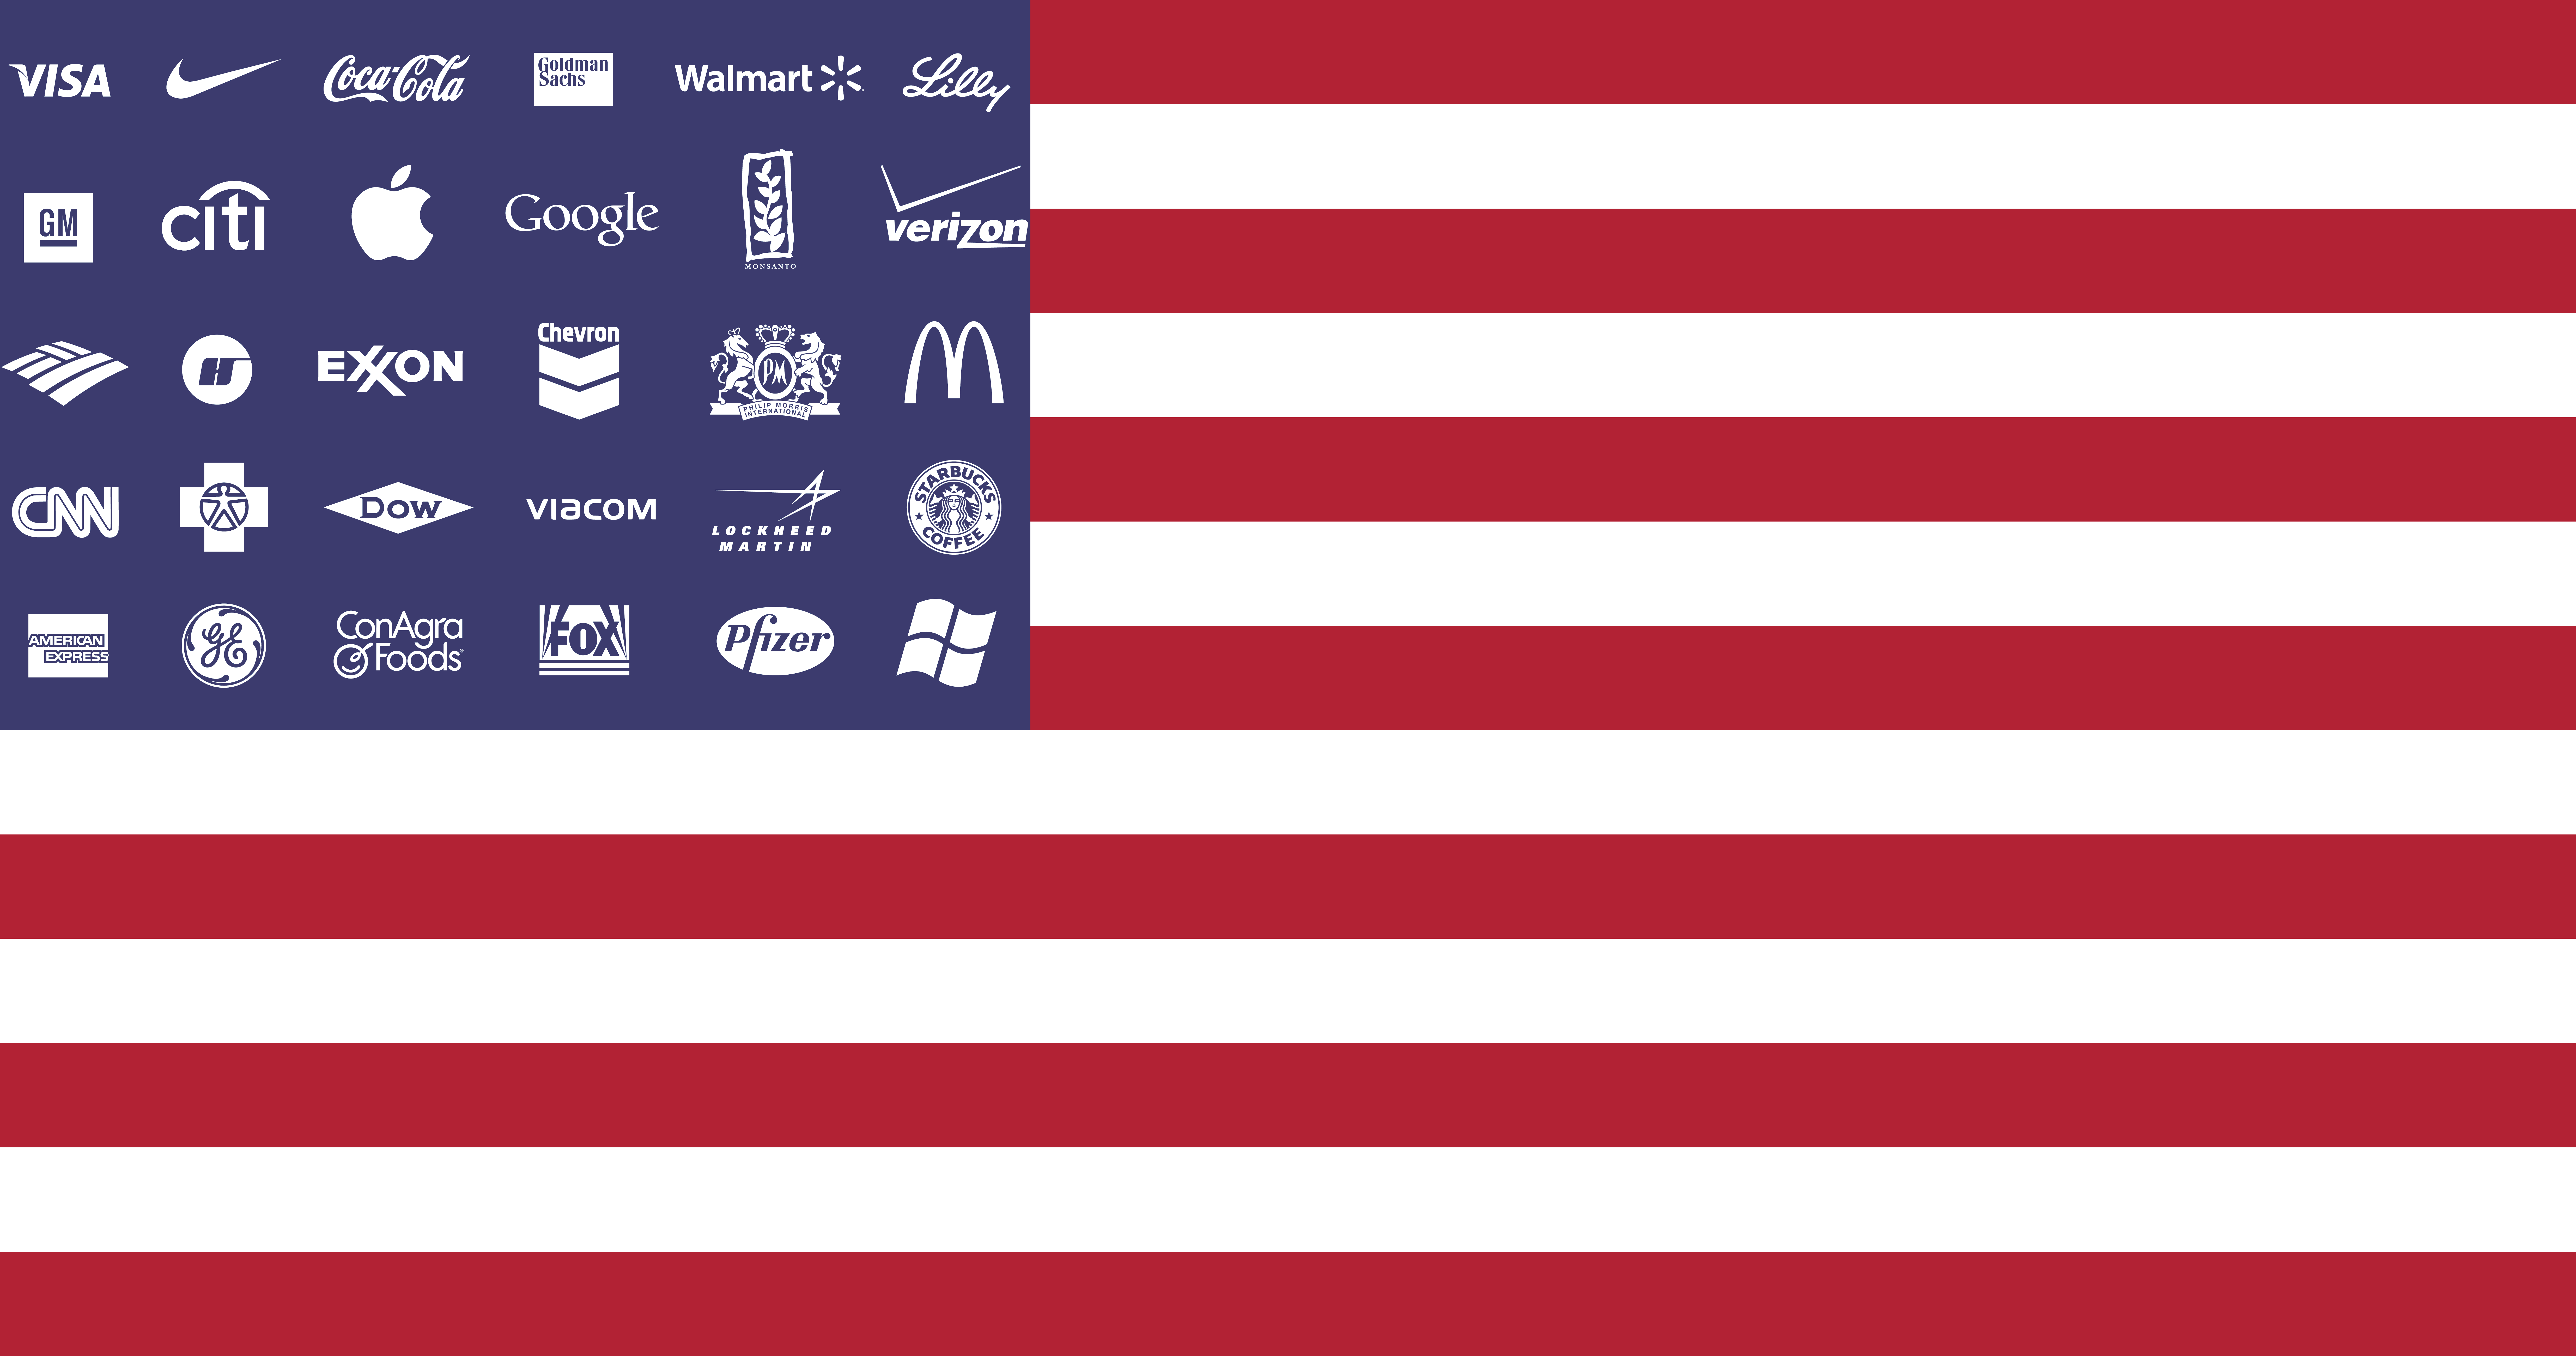 Corporate America flag, 2011 AdBusters design rendered by EveryScreen.com.